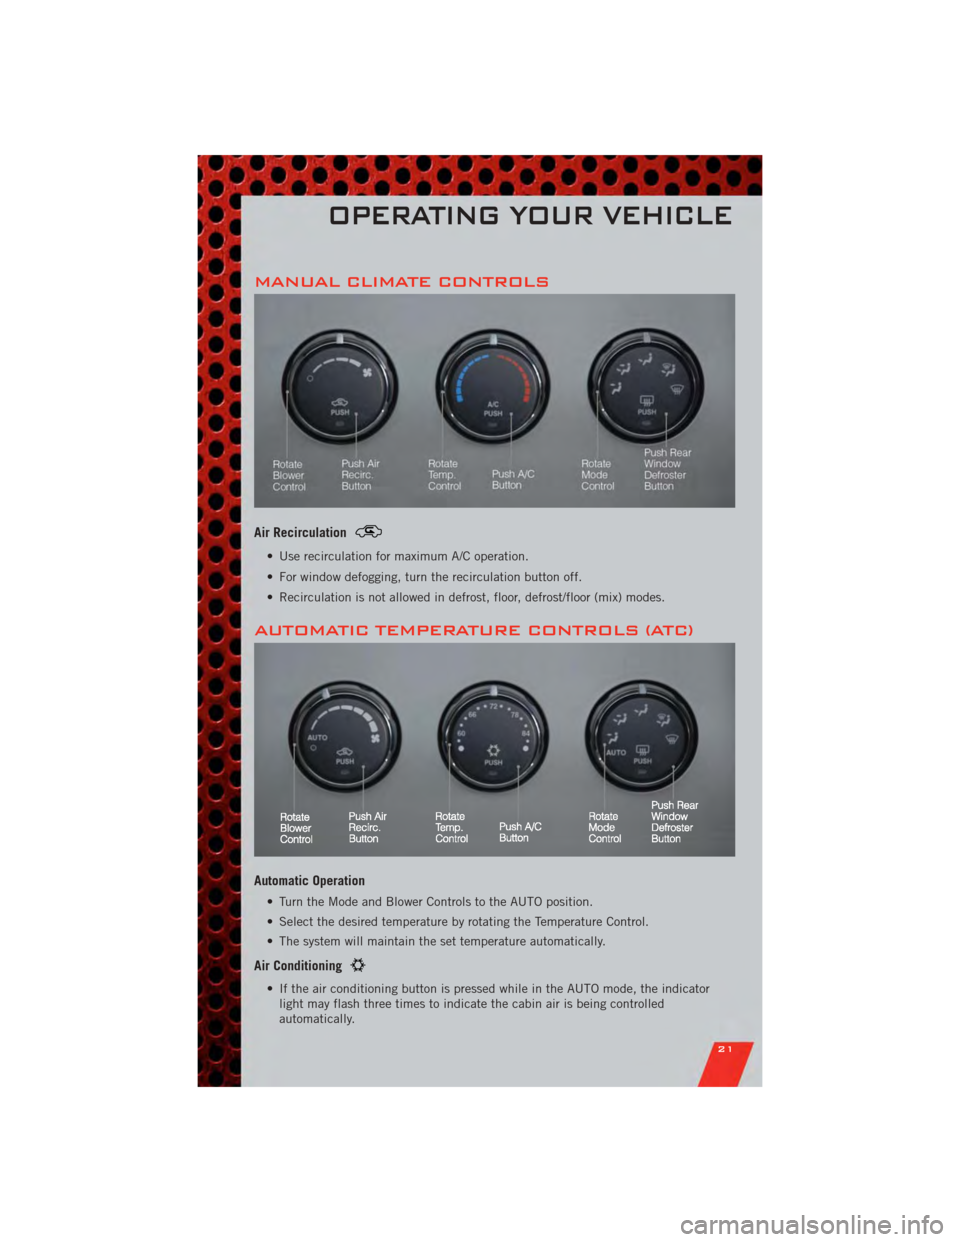 DODGE AVENGER 2011 2.G User Guide MANUAL CLIMATE CONTROLS
Air Recirculation
• Use recirculation for maximum A/C operation.
• For window defogging, turn the recirculation button off.
• Recirculation is not allowed in defrost, flo